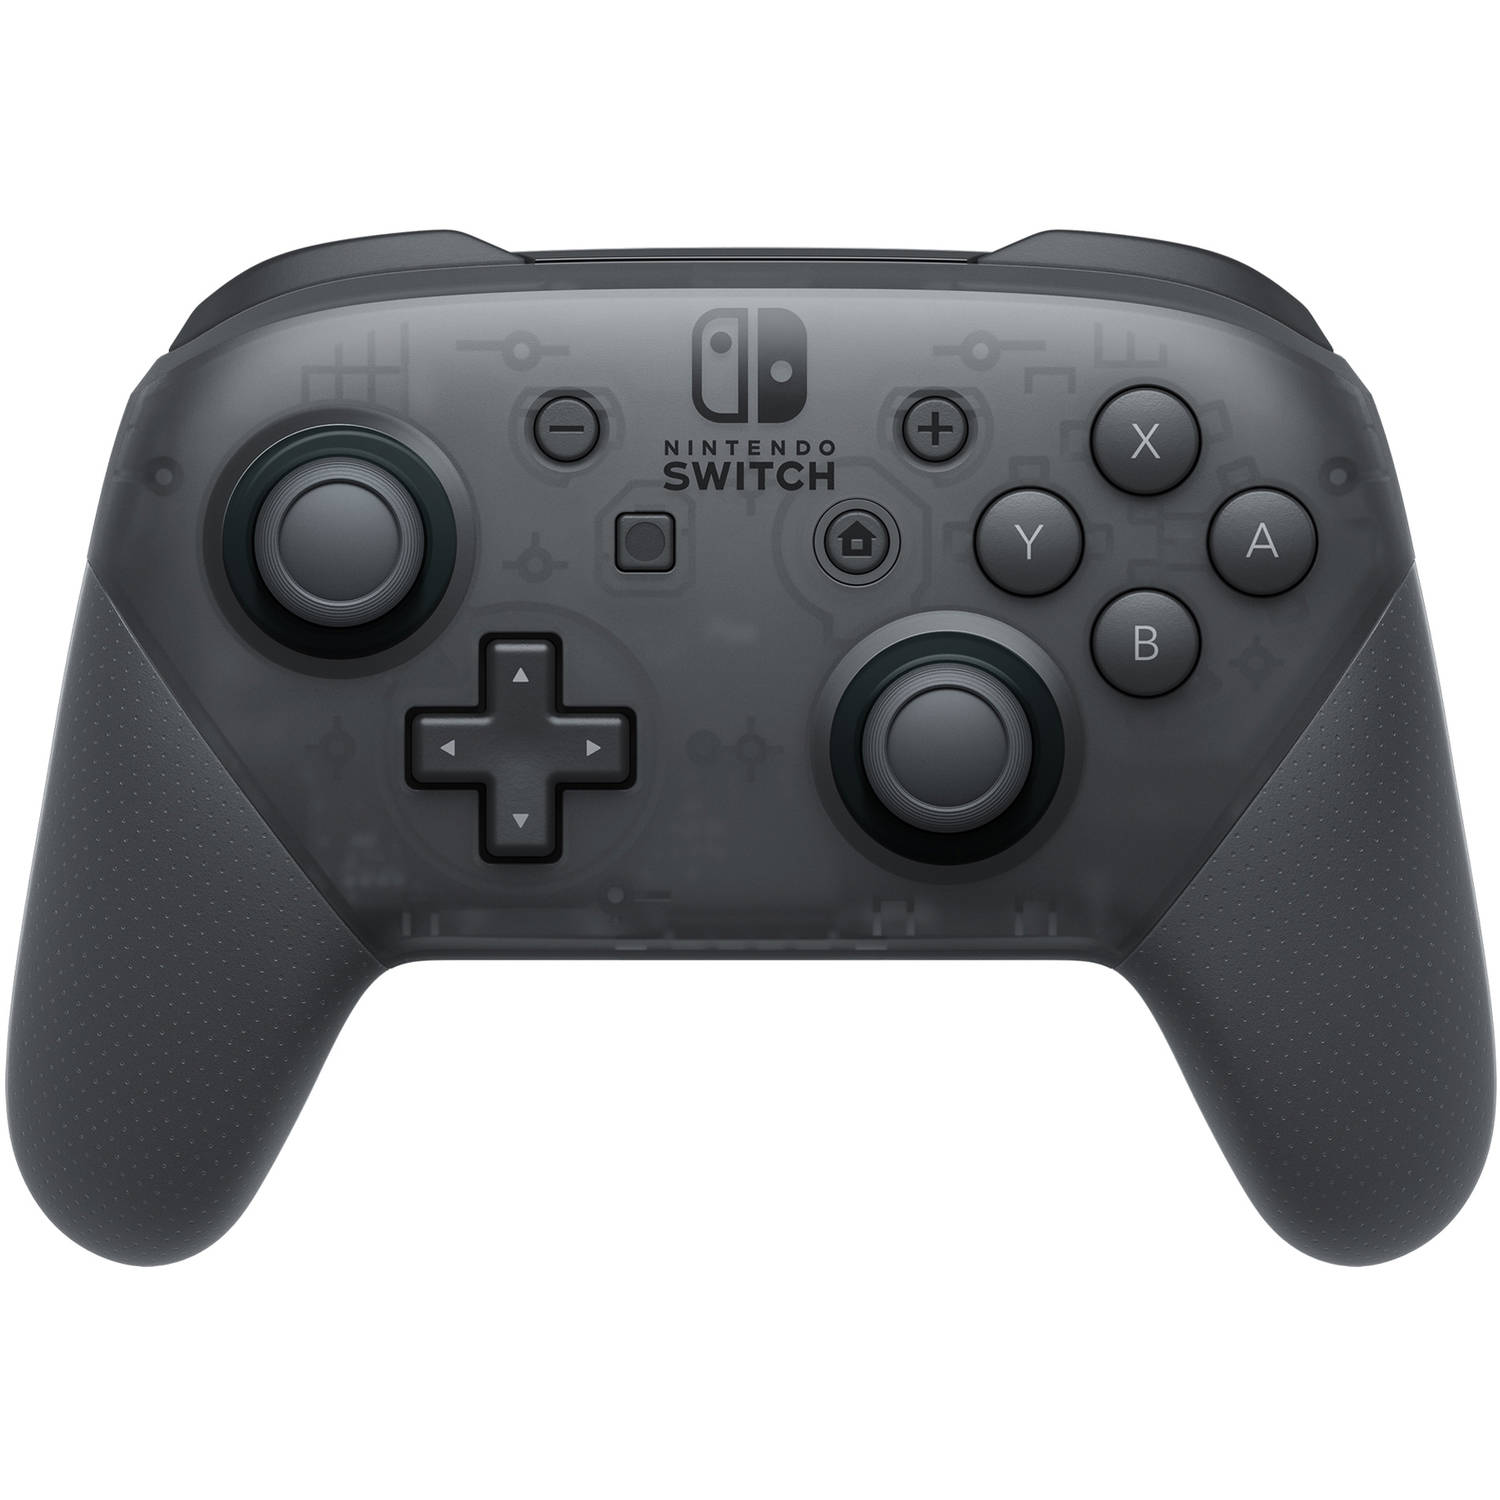 Nintendo Switch Pro Controller - image 1 of 5